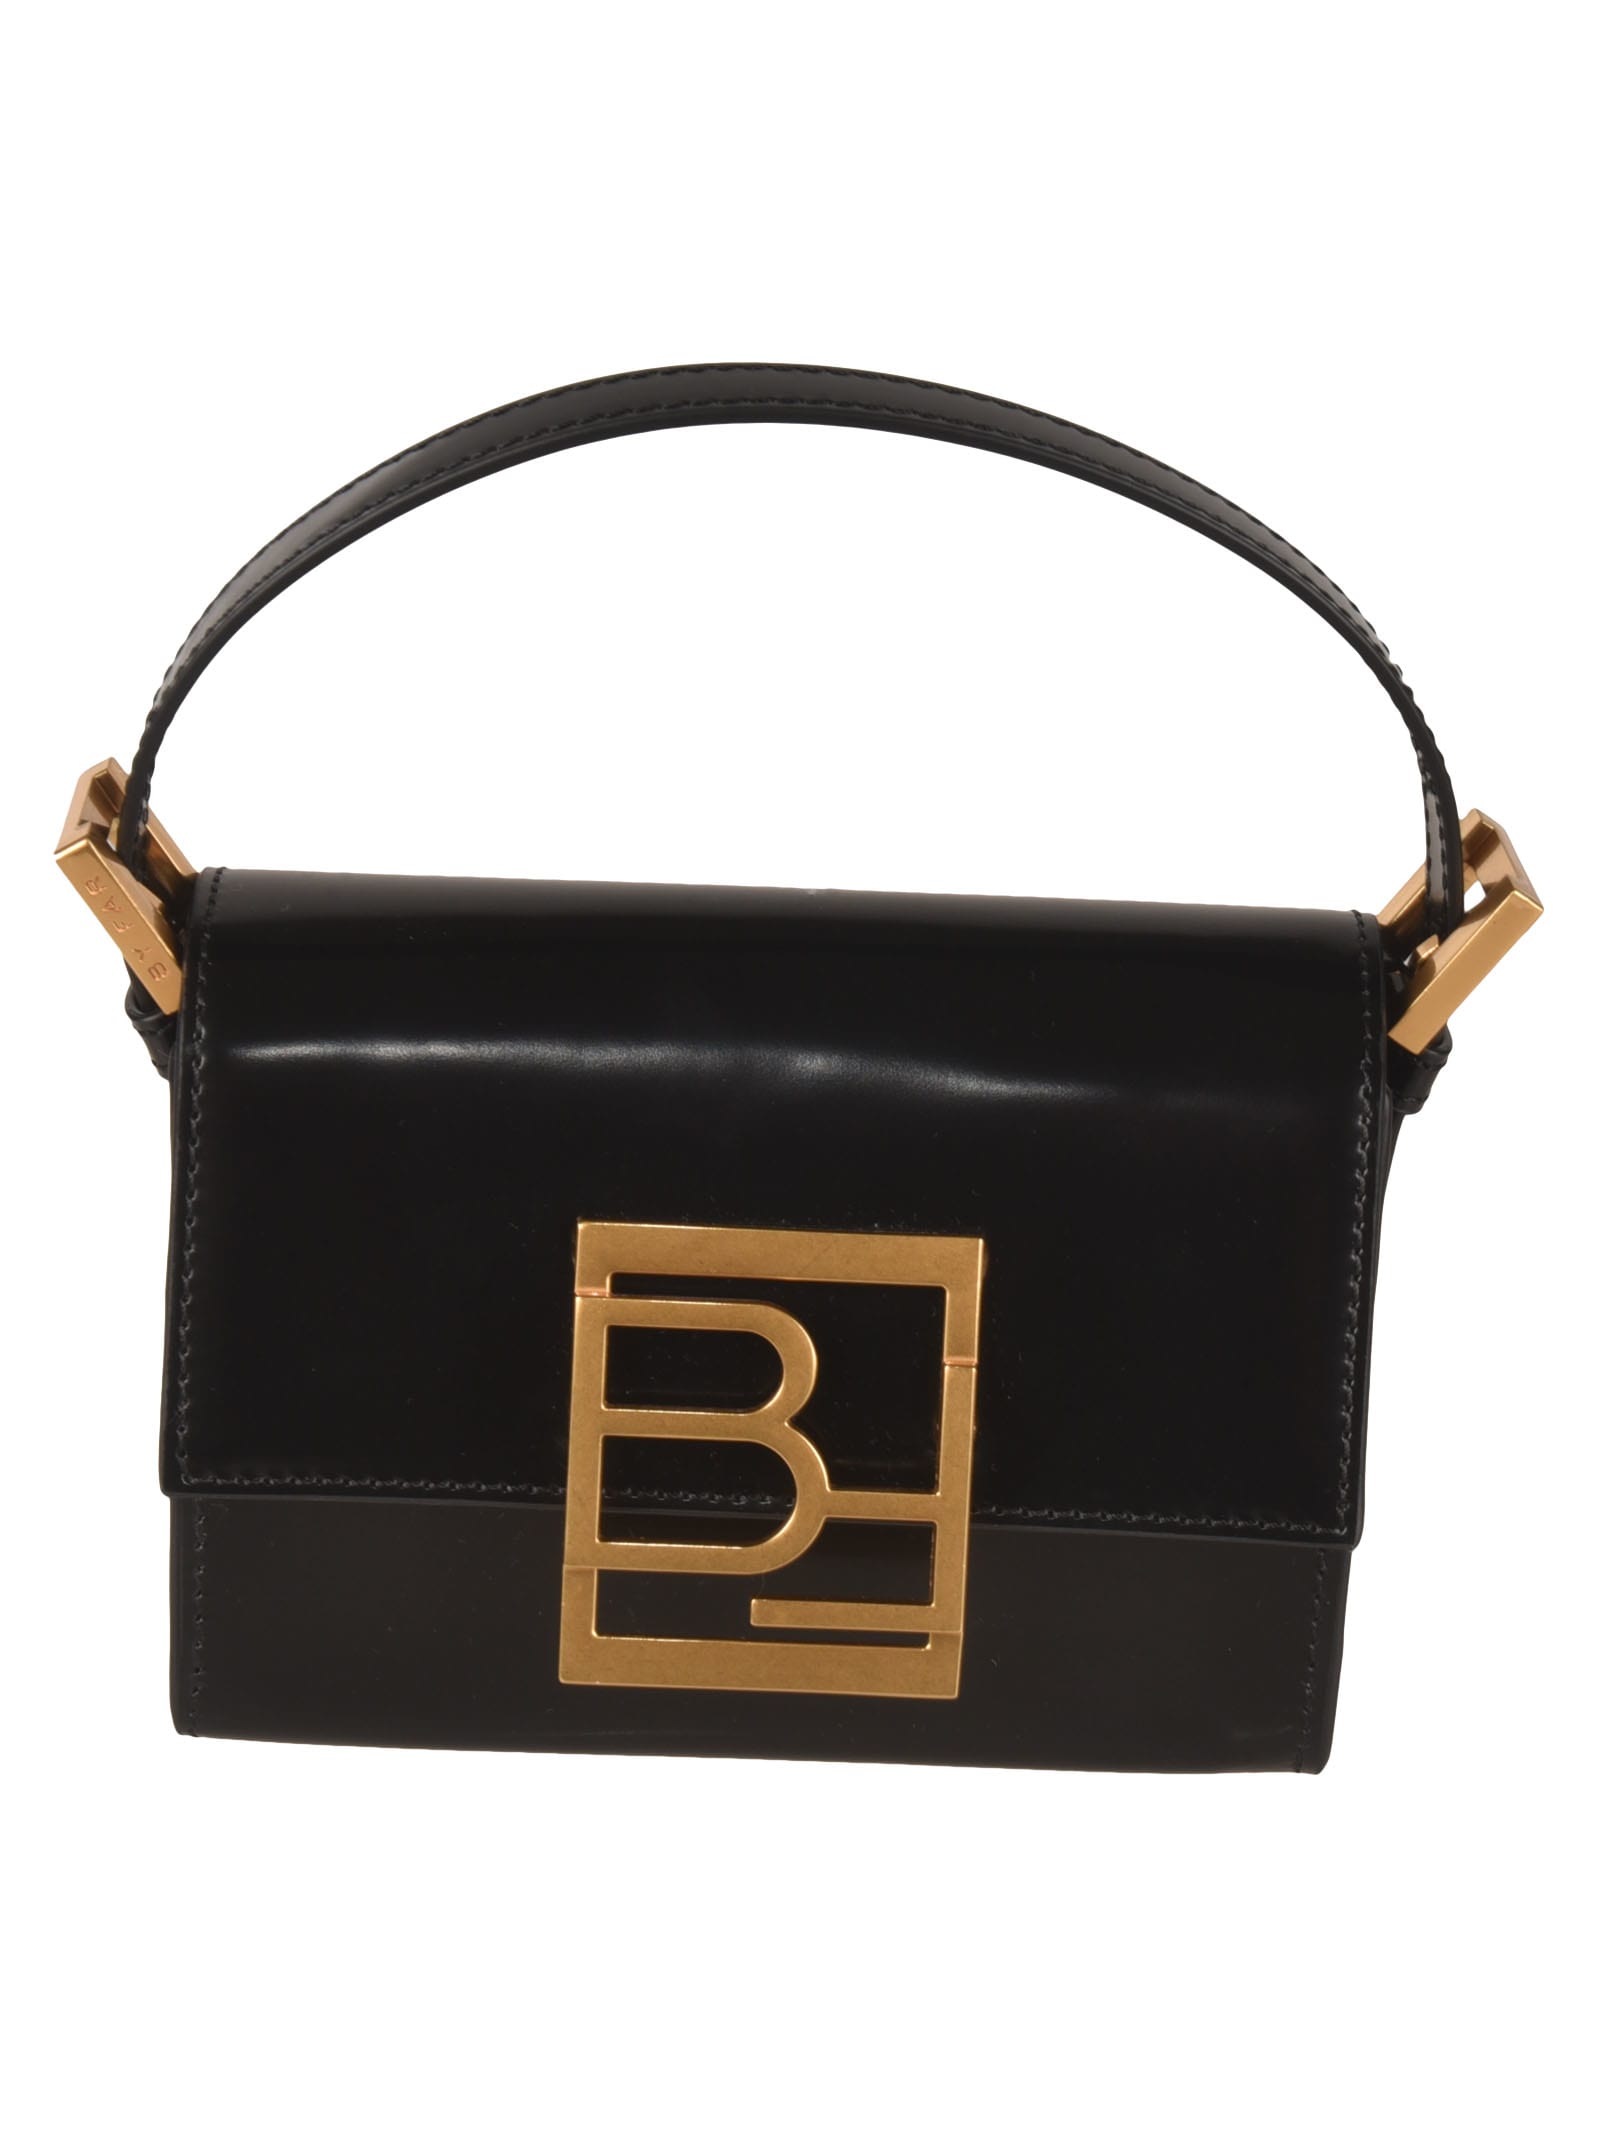 BY FAR Logo Front Flap Tote